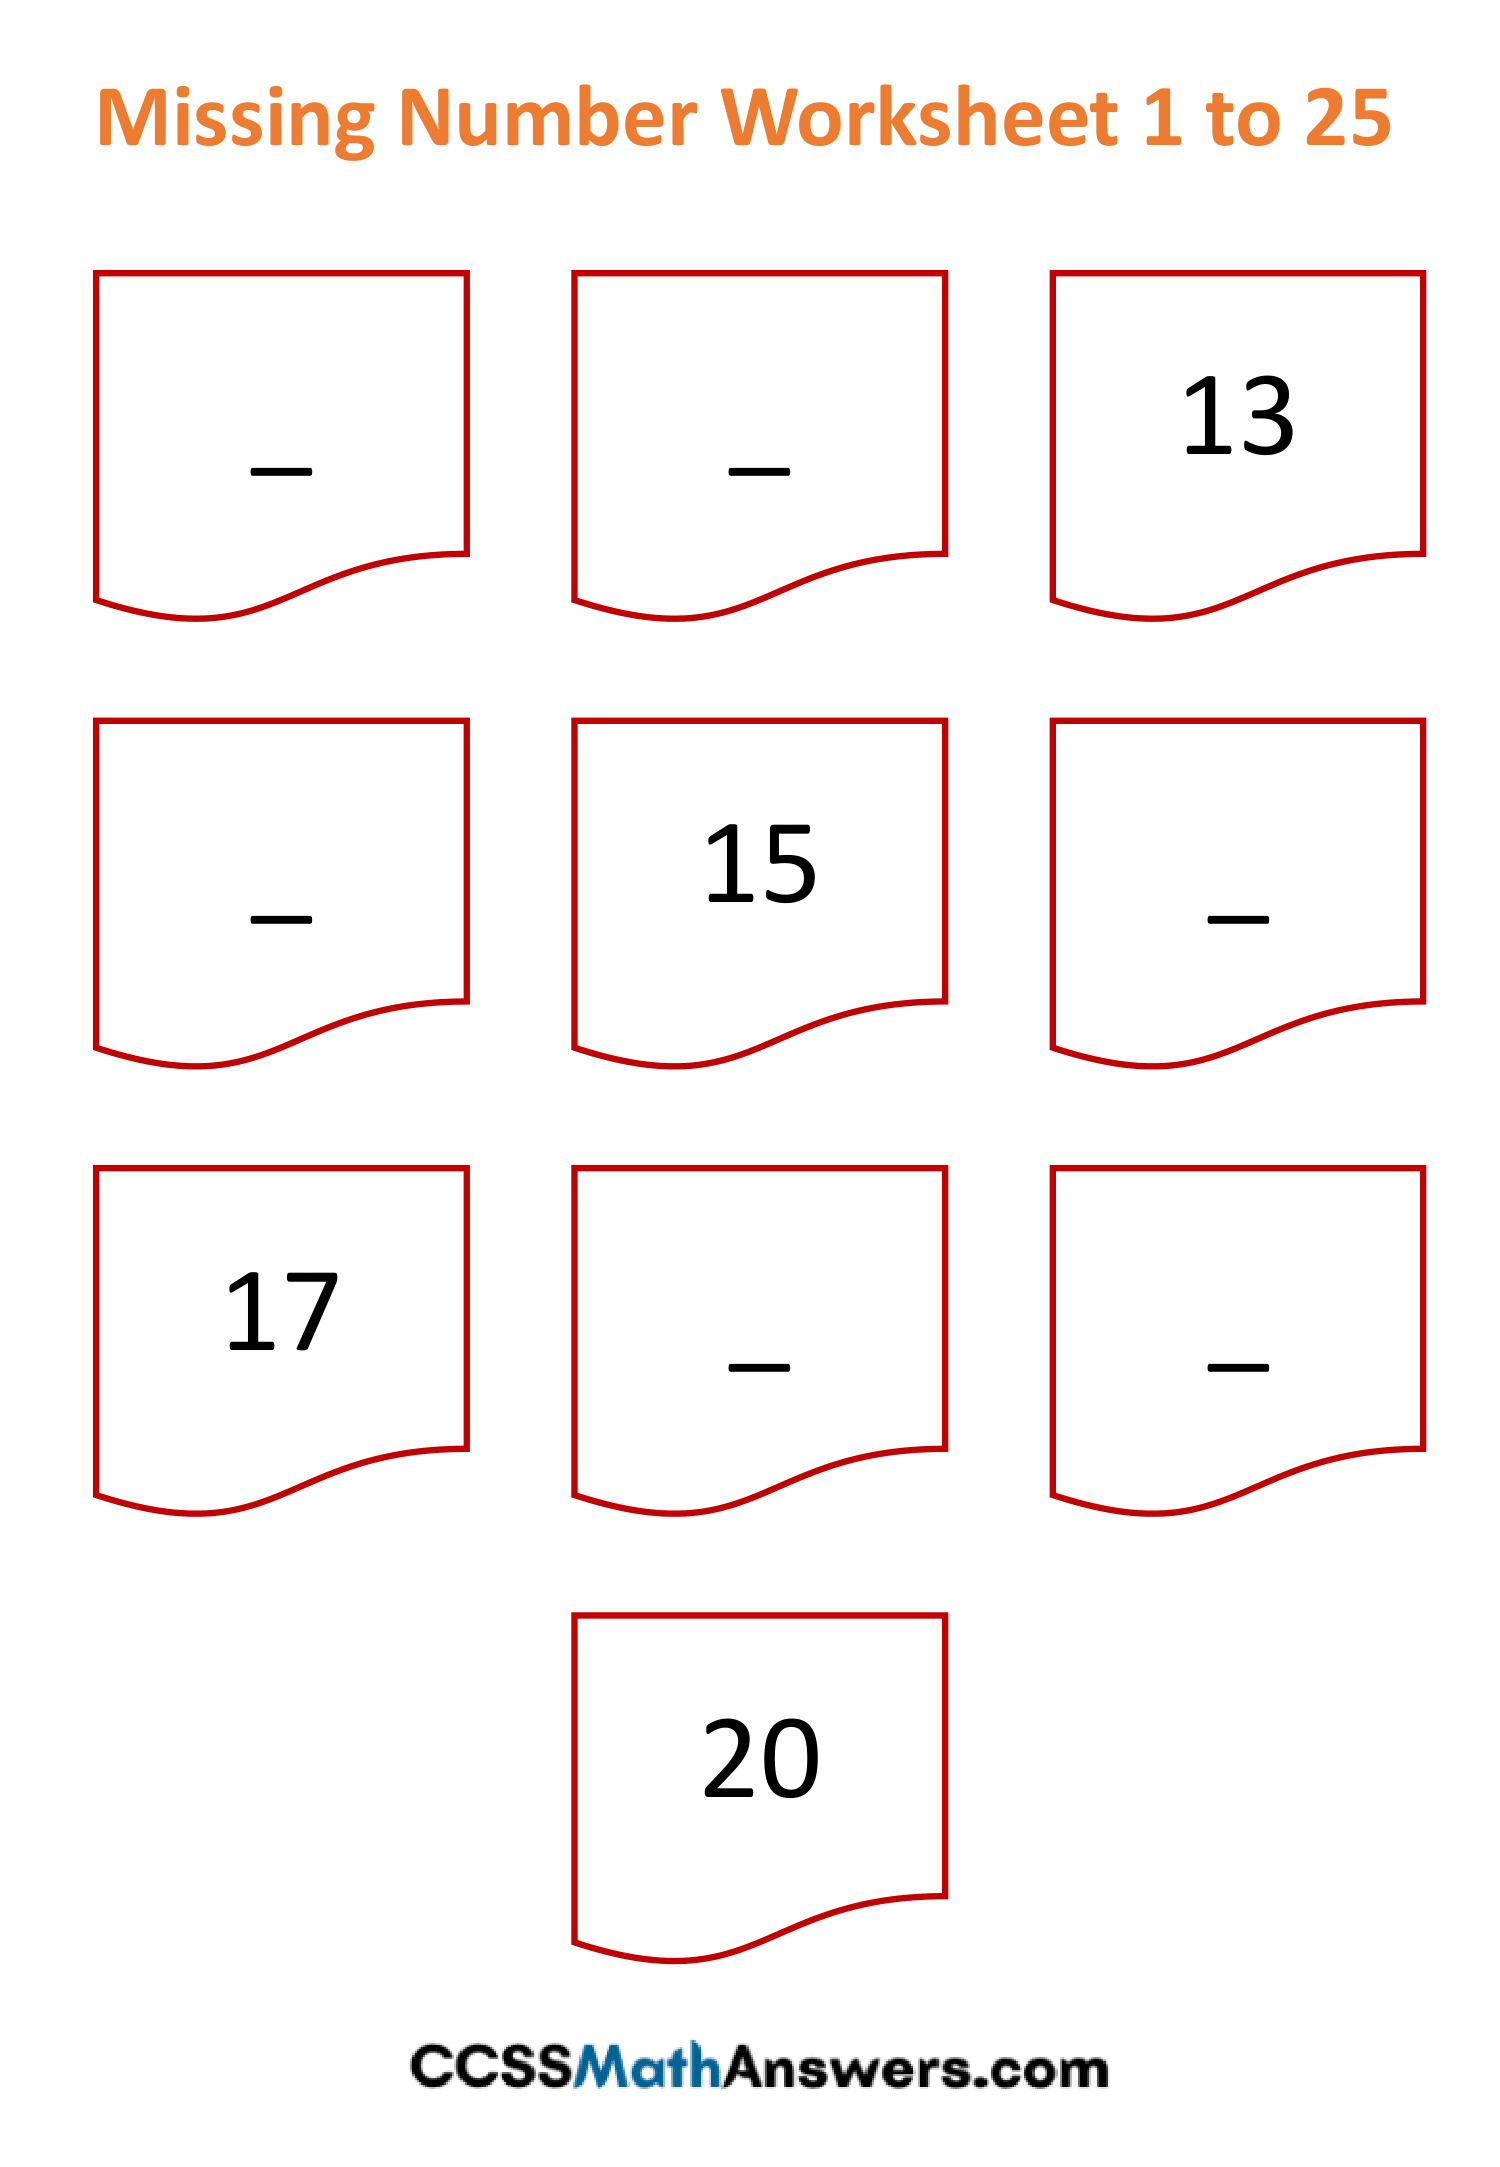 Fill in Missing Number Worksheets 1 to 25